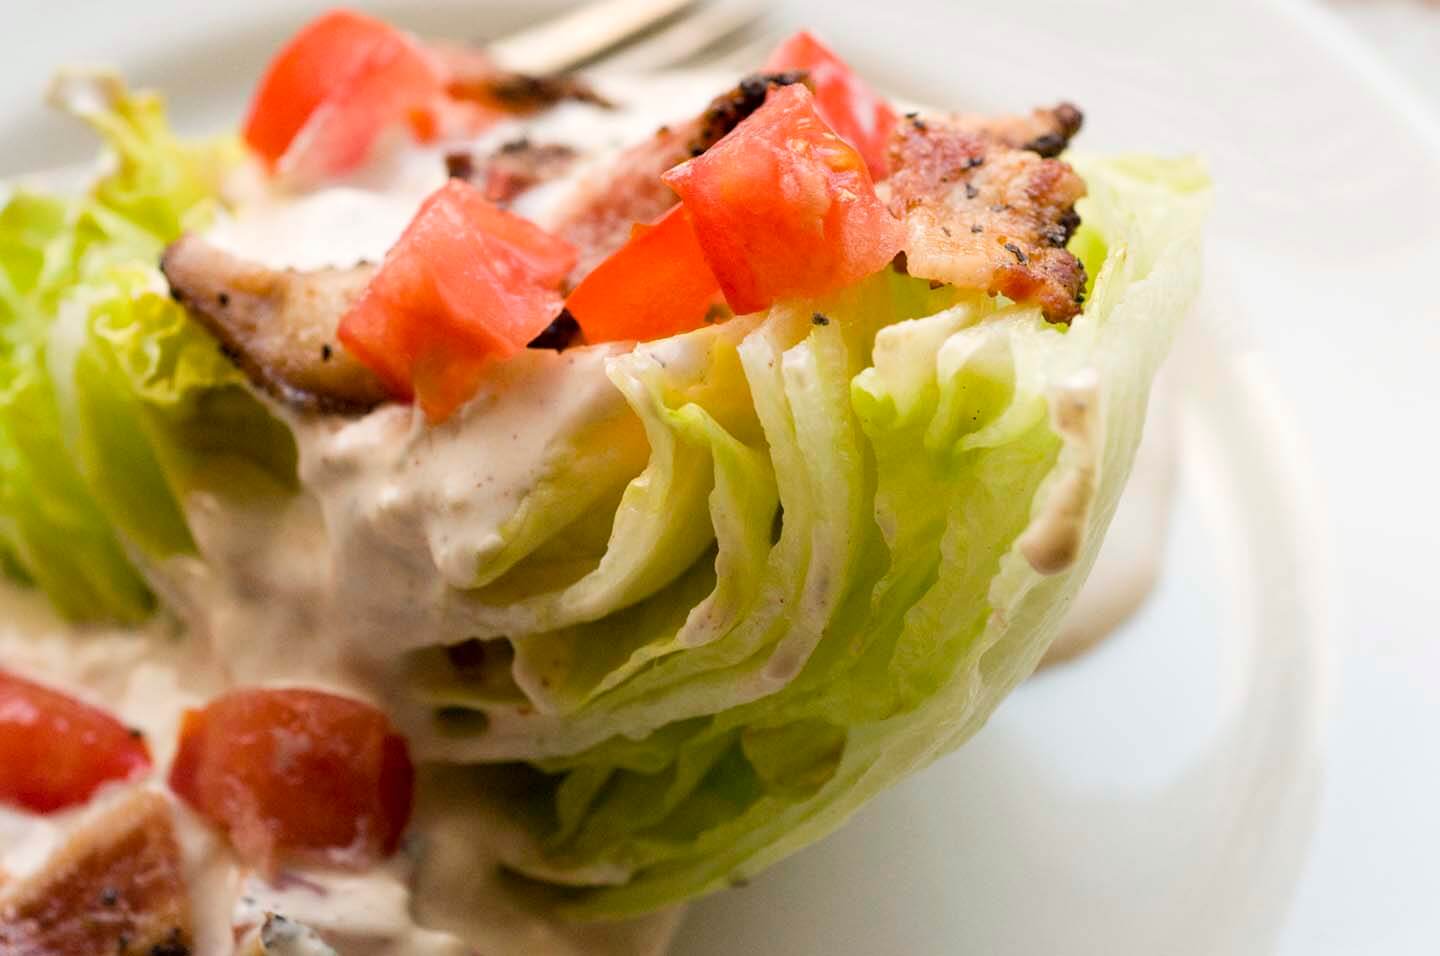 BLT wedge salad with chipotle blue cheese dressing | Homesick Texan